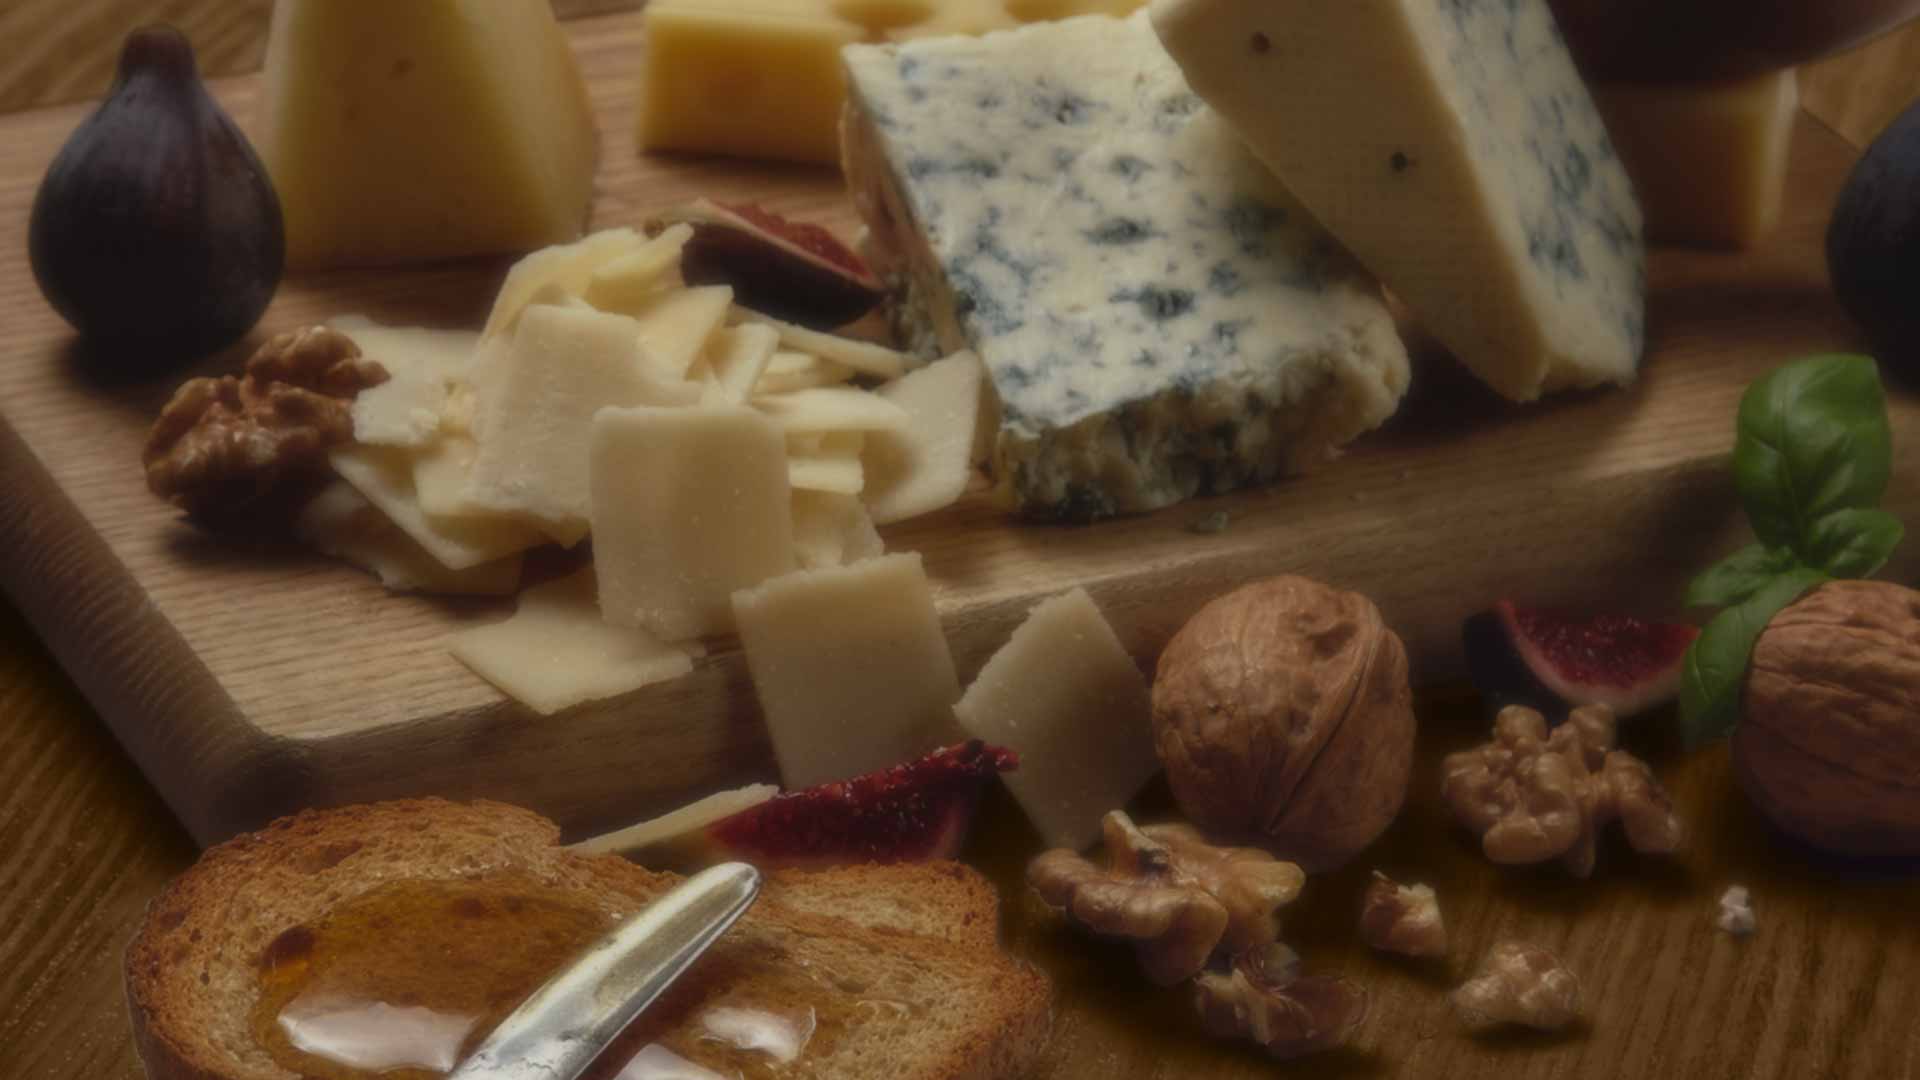 Cheeses, walnuts, figs on cutting board